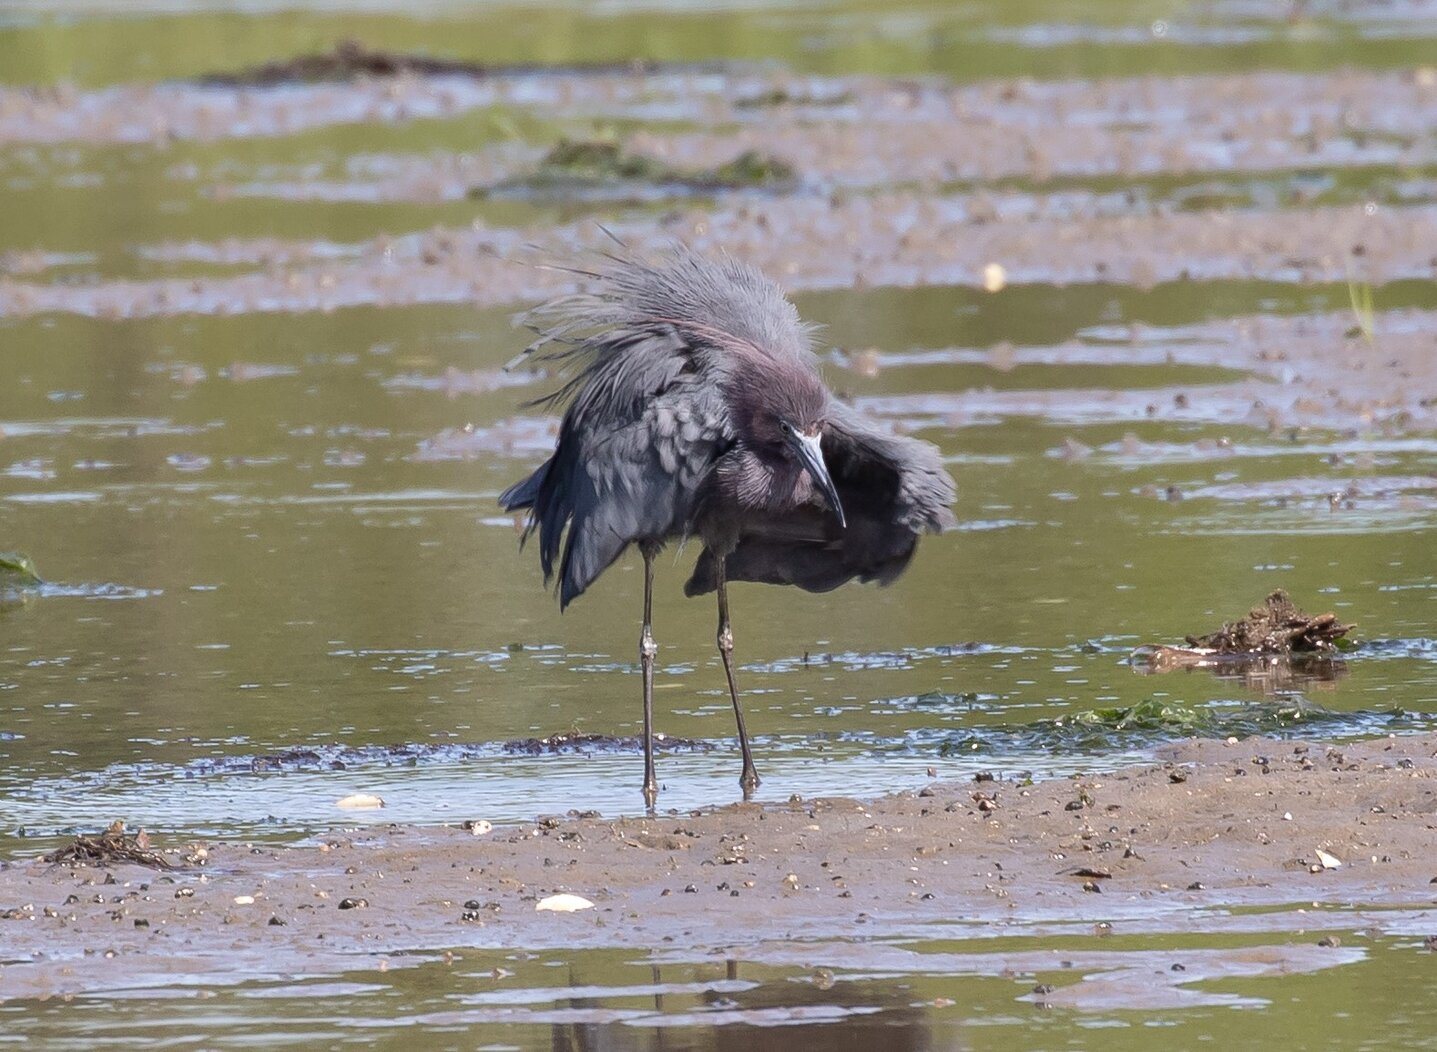 Little Blue Heron (here seen puffing up its breeding plumes) is frequently seen foraging at Plumb Beach. Photo: Ryan F. Mandelbaum